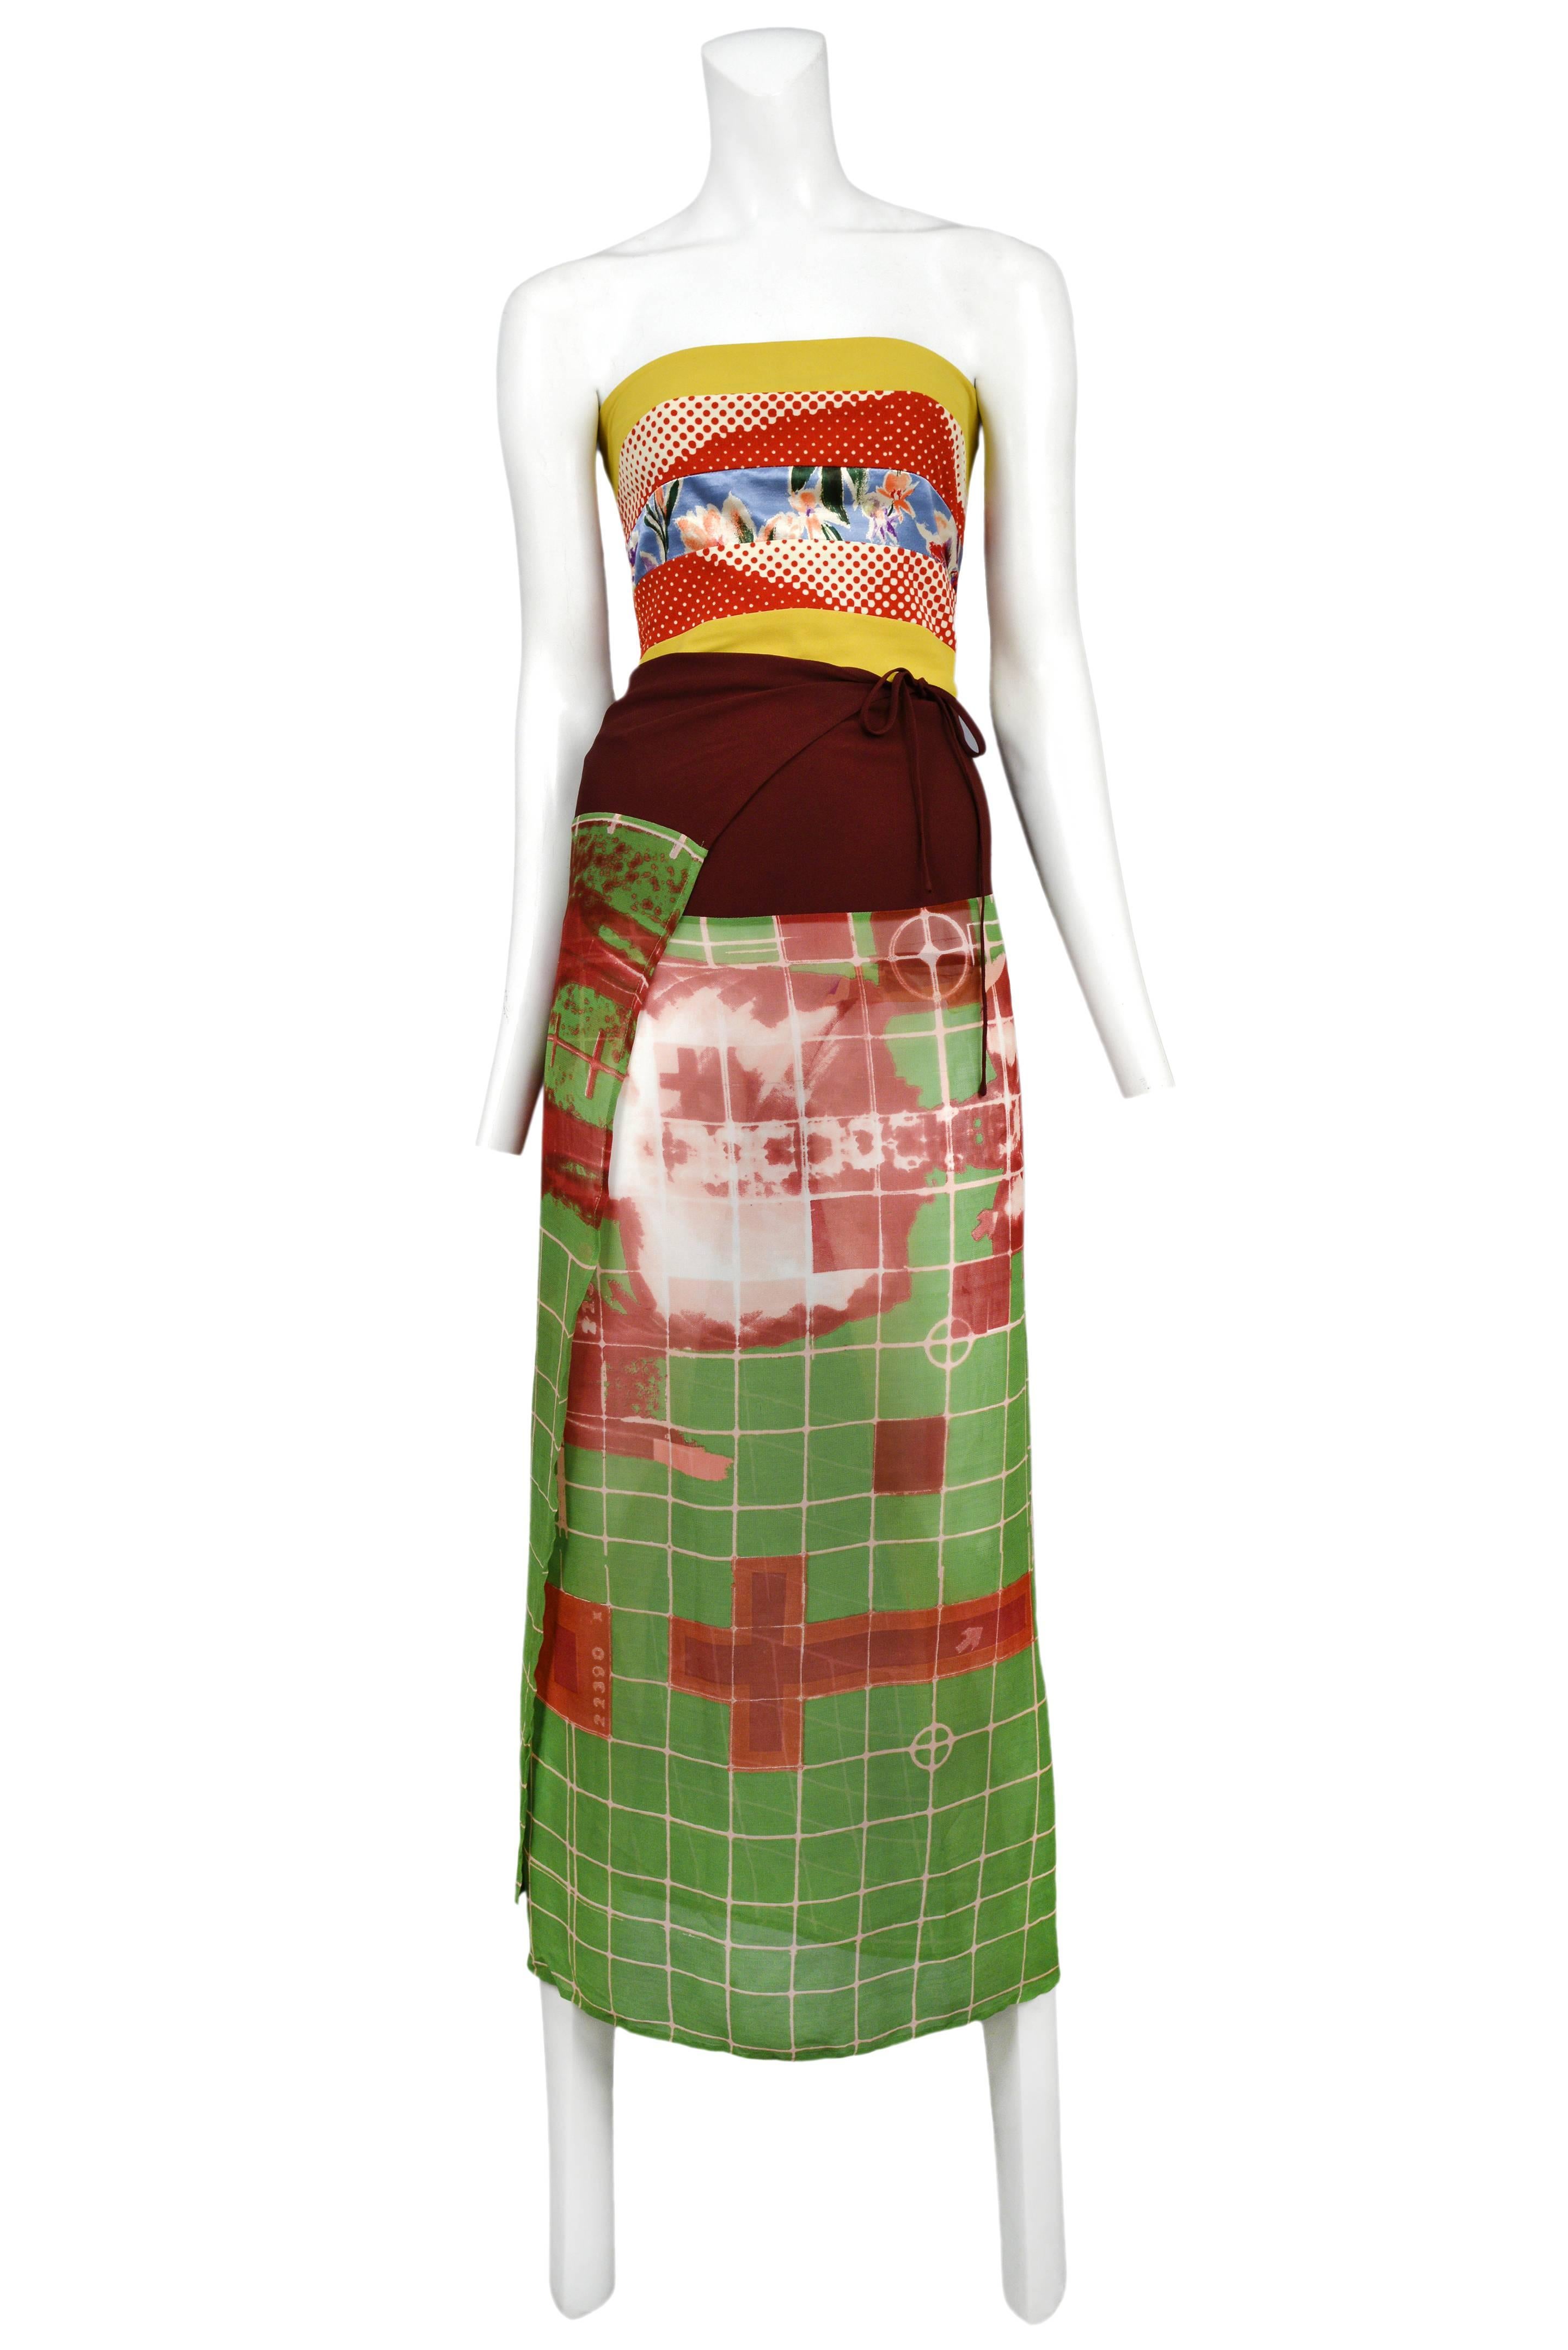 Vintage Jean Paul Gaultier strapless wrap dress featuring a fitted bandeau style top with mix-matched multicolor prints, that anchors a wrap skirt comprised of a burgundy panel as well as an abstract green and red grid print panel. Circa Spring /